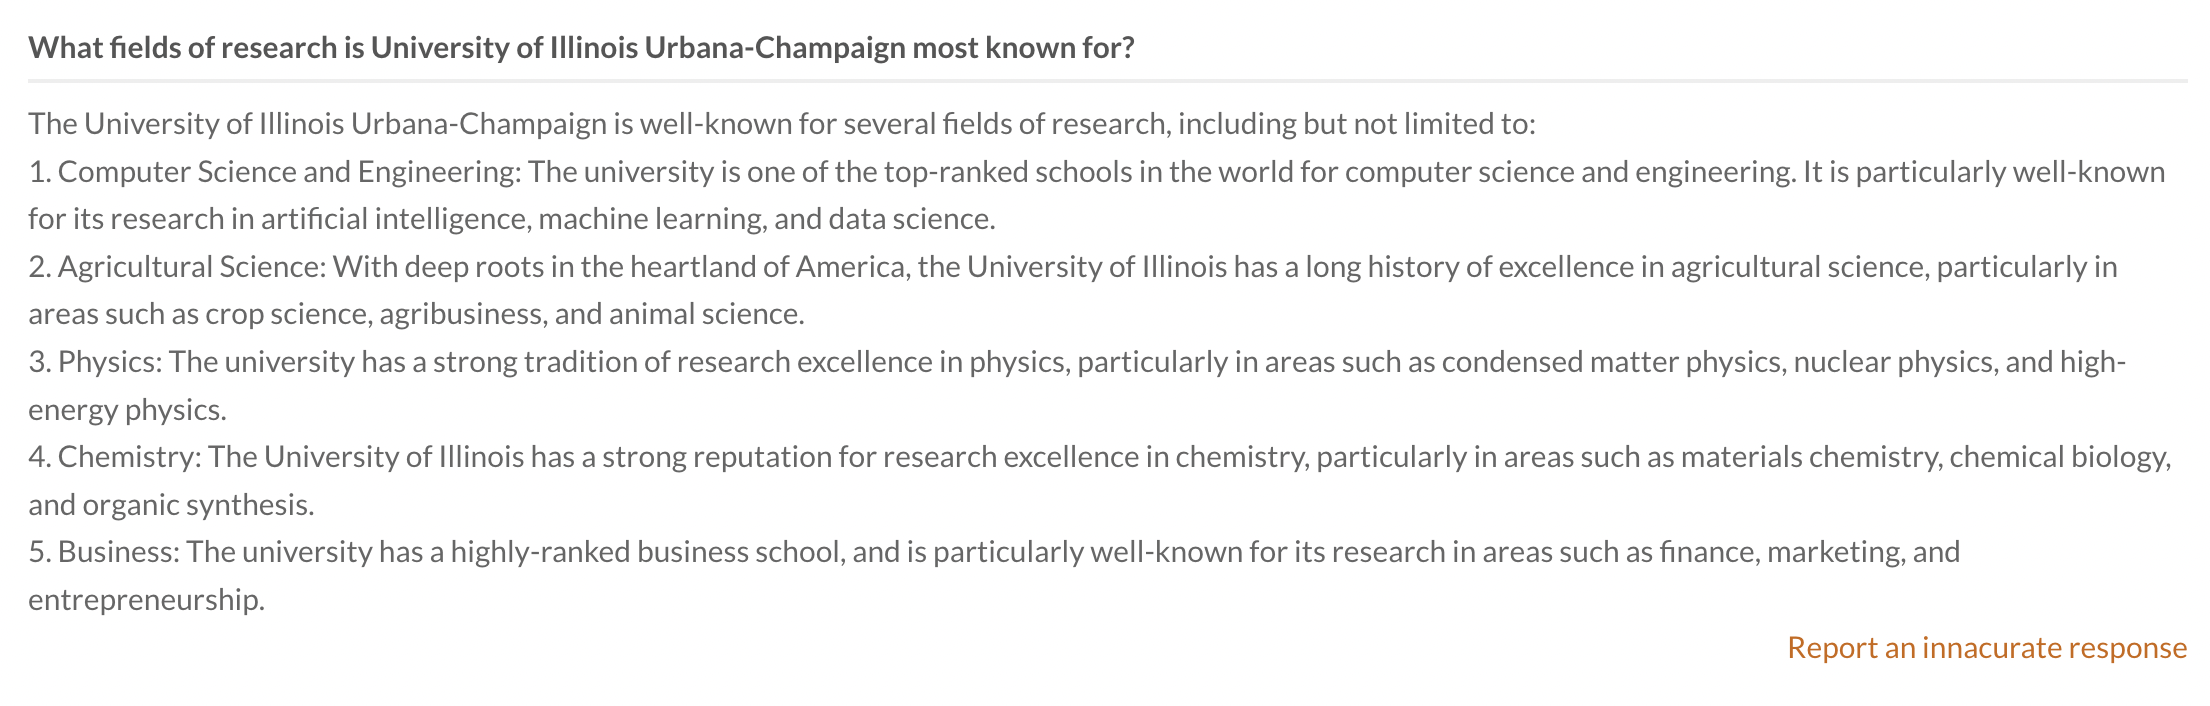 What fields of research is University of Illinois Urbana-Champaign most known for?